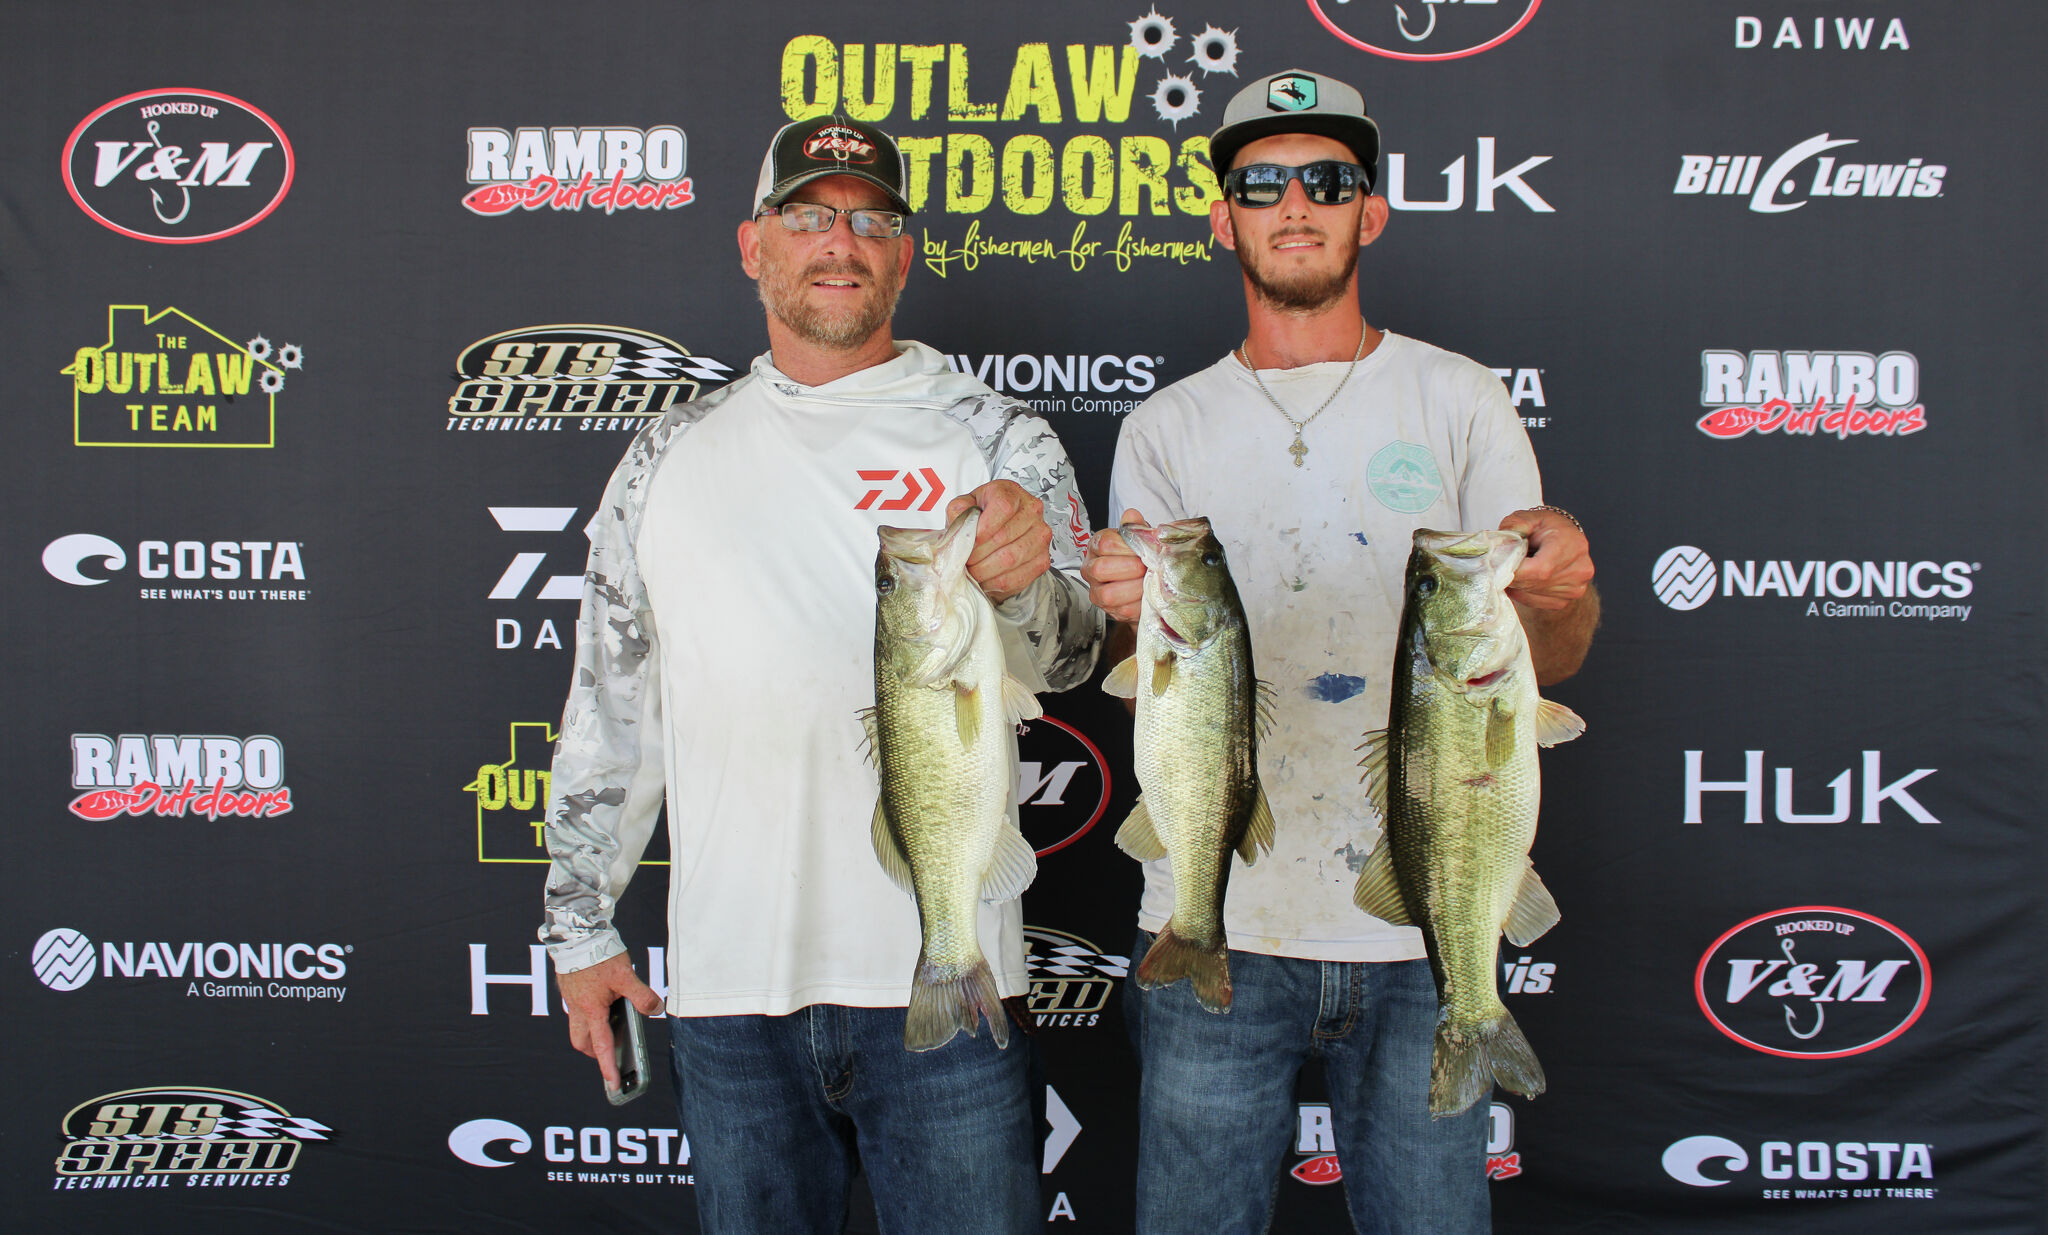 Boulware team wins 6th annual Outlaw Outdoors Father's Day Tournament